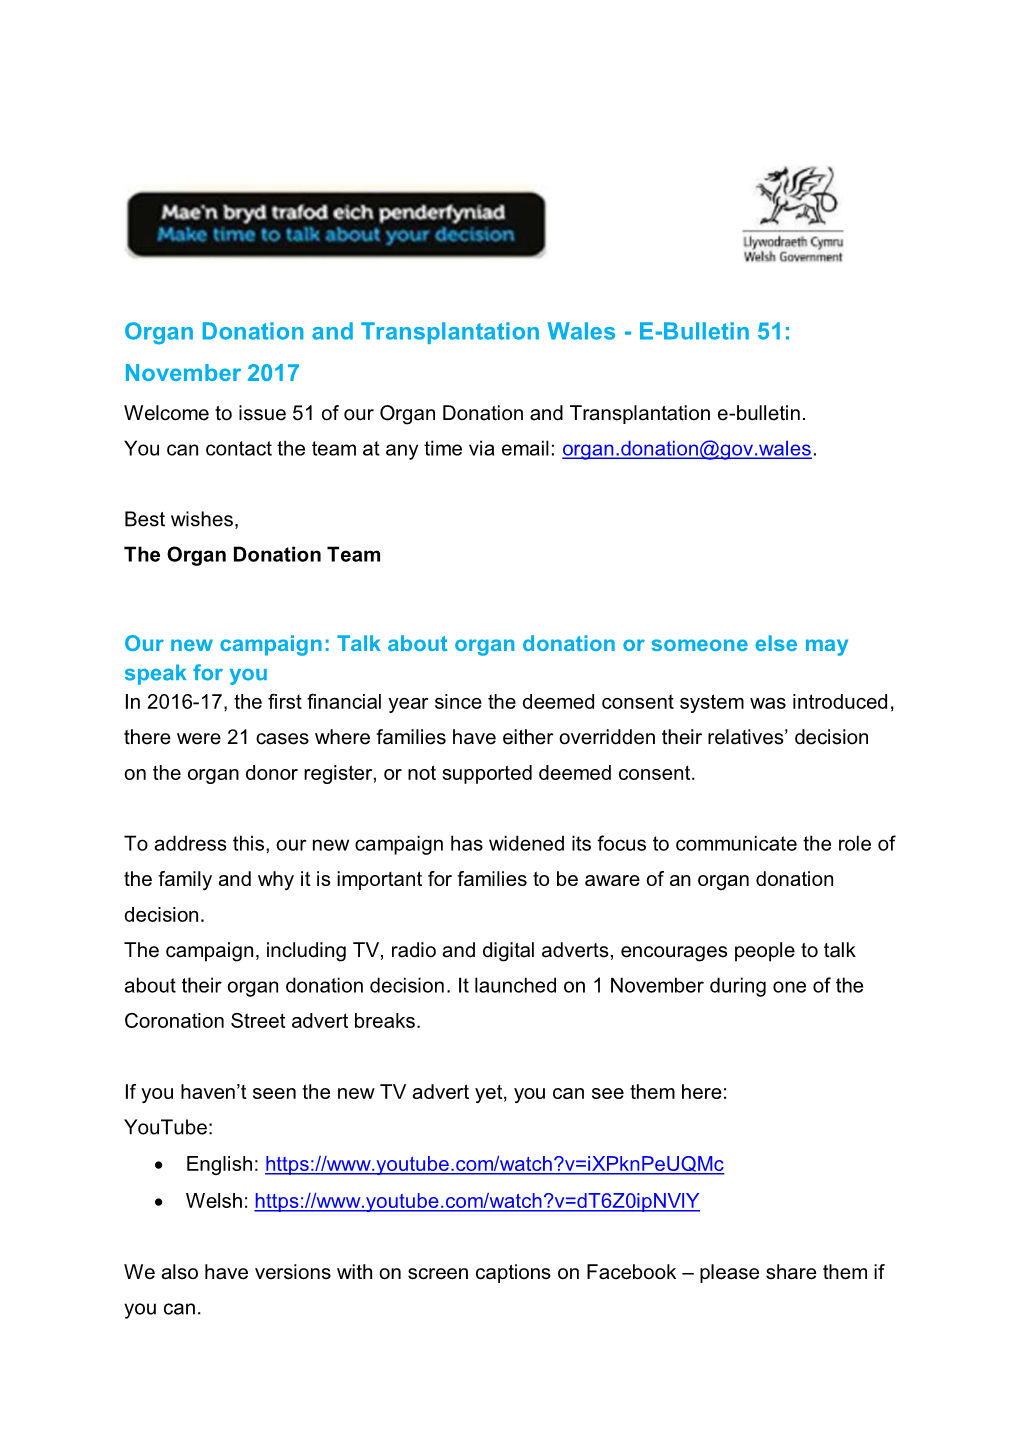 Organ Donation and Transplantation Wales - E-Bulletin 51: November 2017 Welcome to Issue 51 of Our Organ Donation and Transplantation E-Bulletin